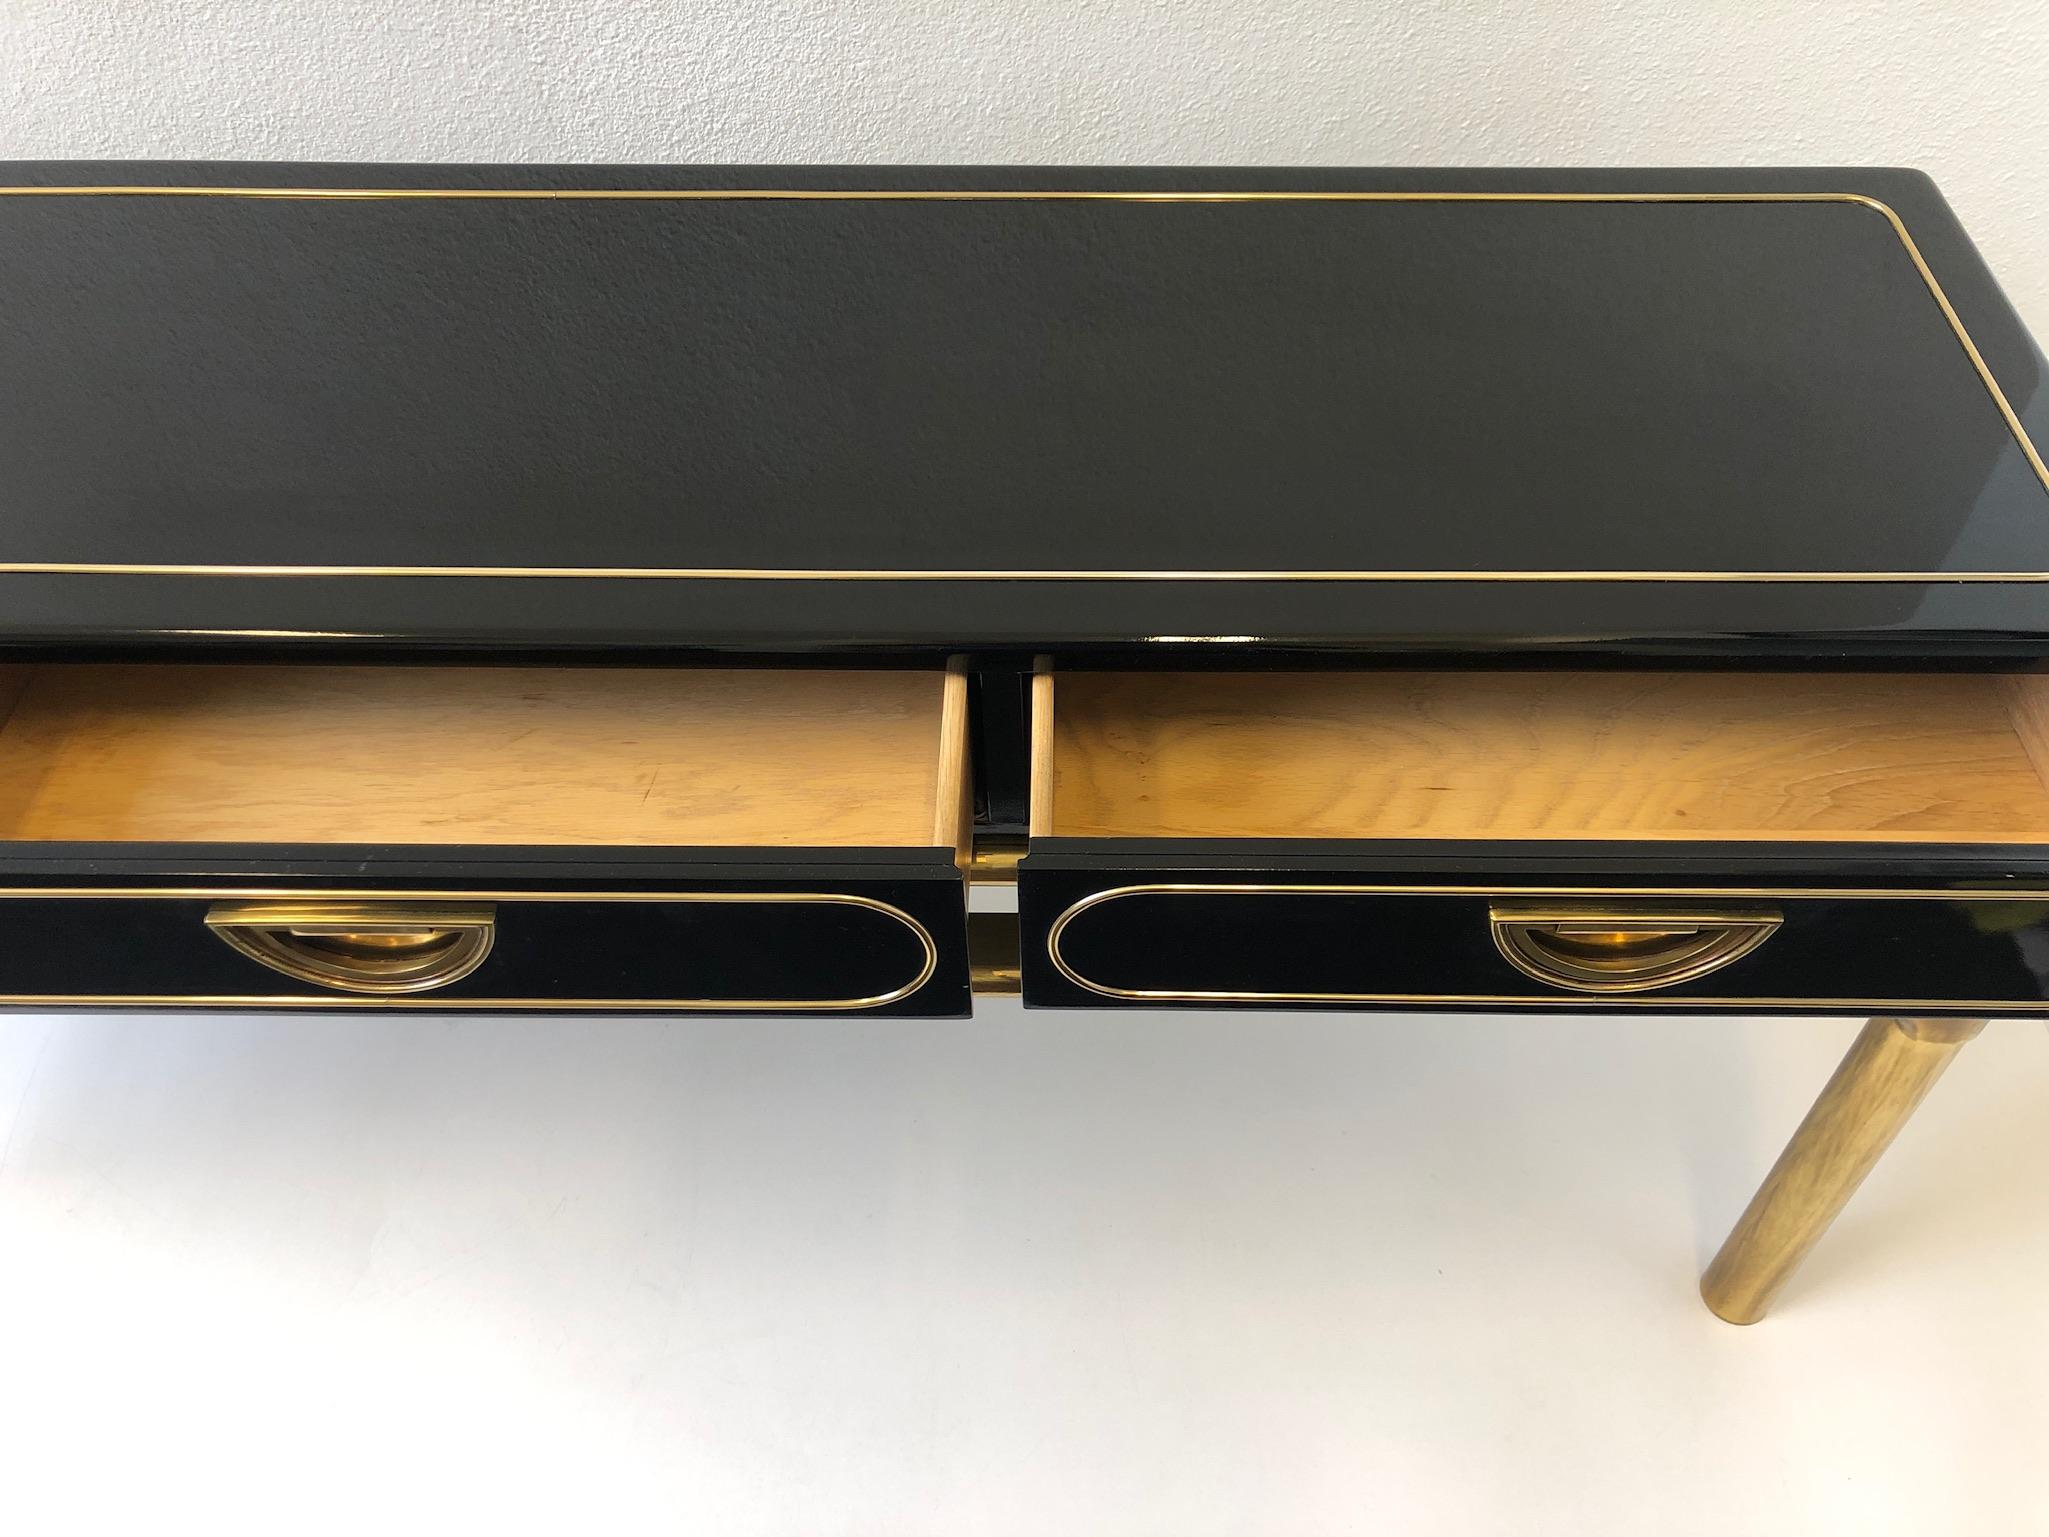 Polished Brass and Black Lacquer Console Table with Drawers by Mastercraft